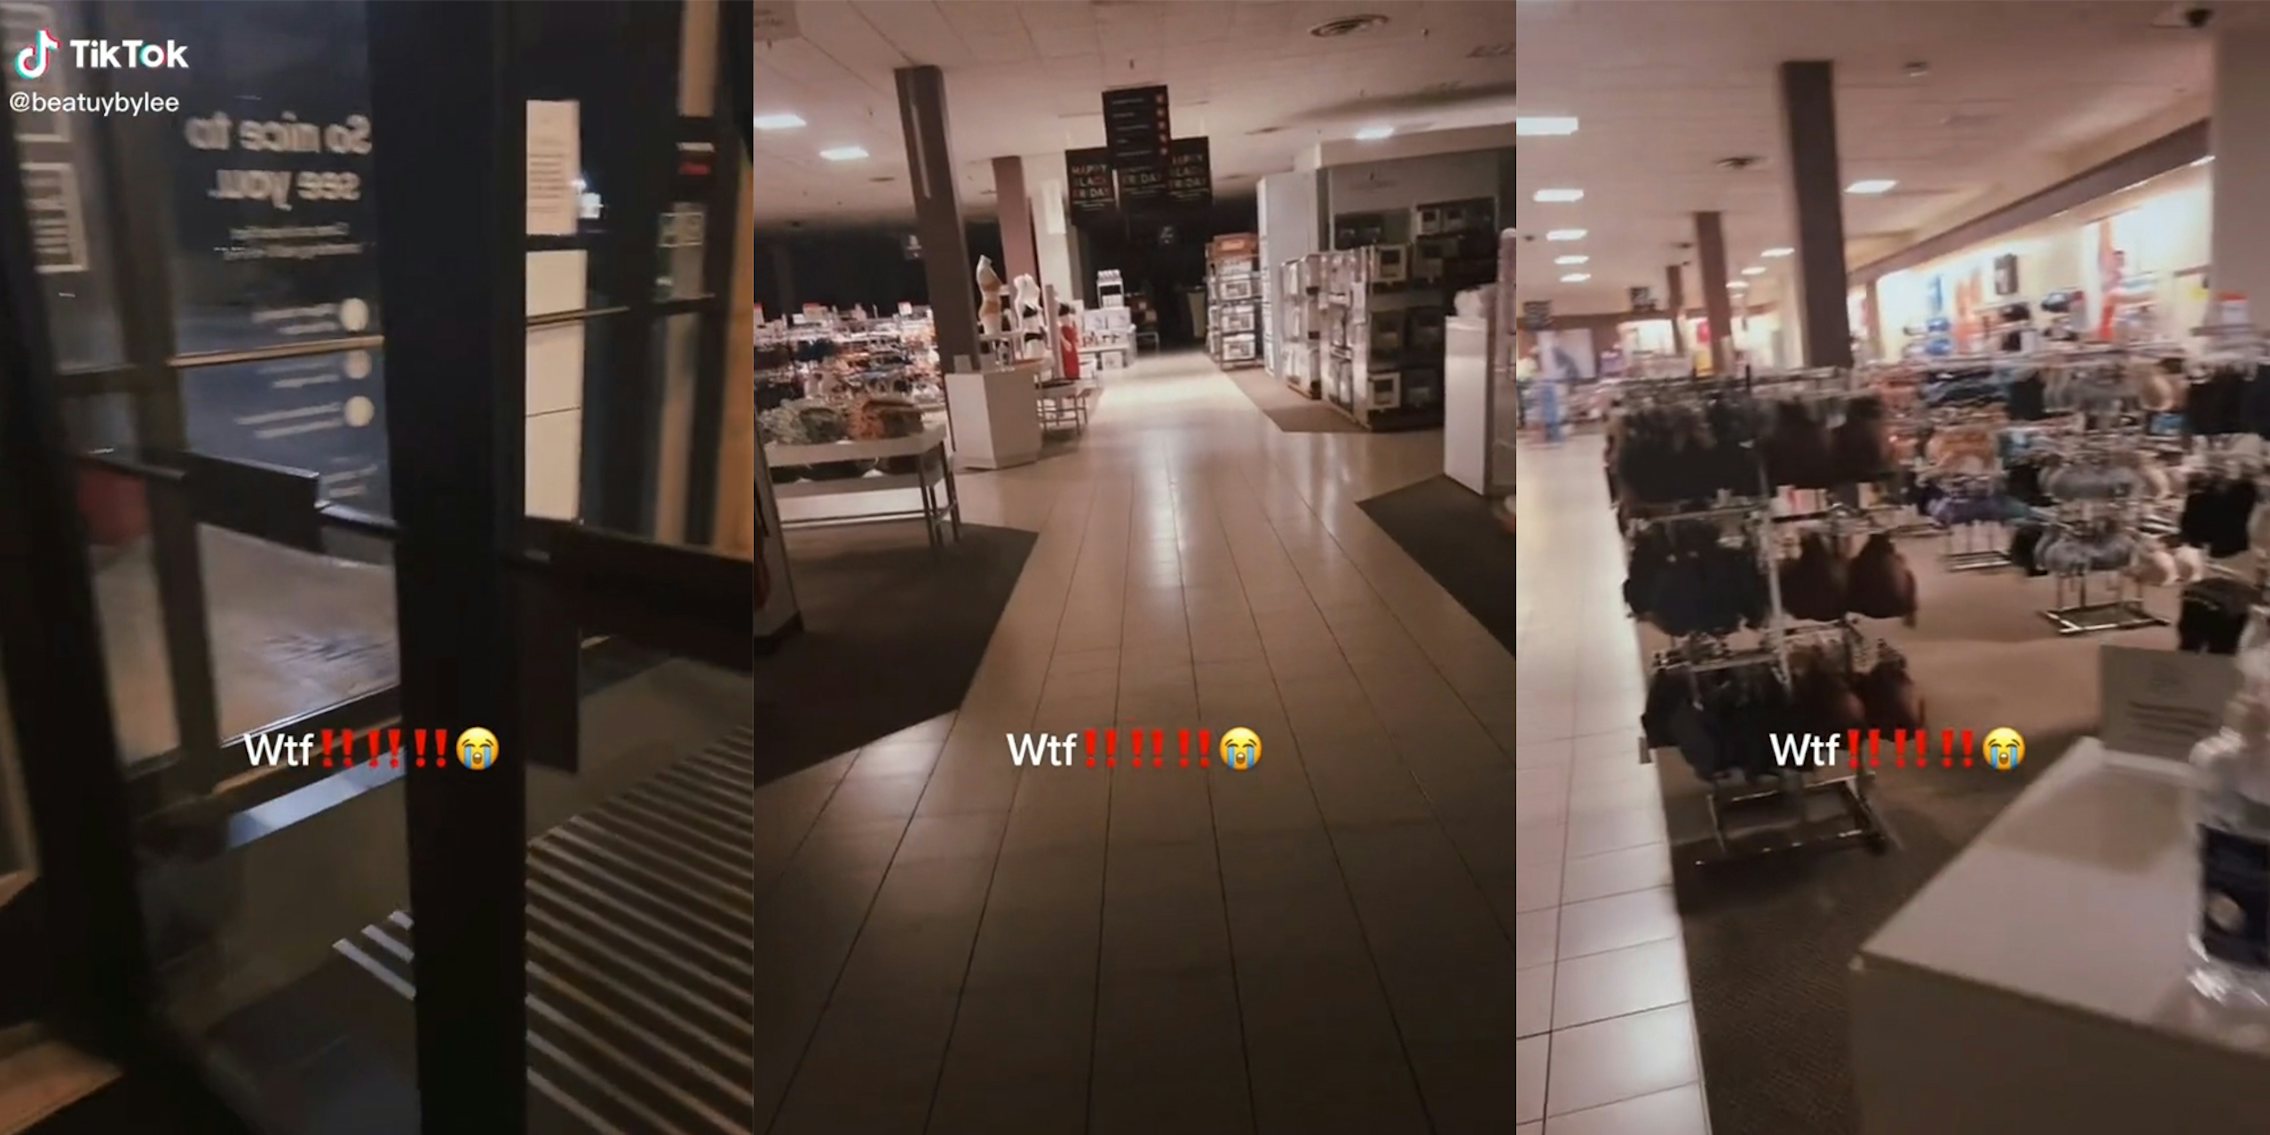 empty store with caption 'Wtf!!!!!!'